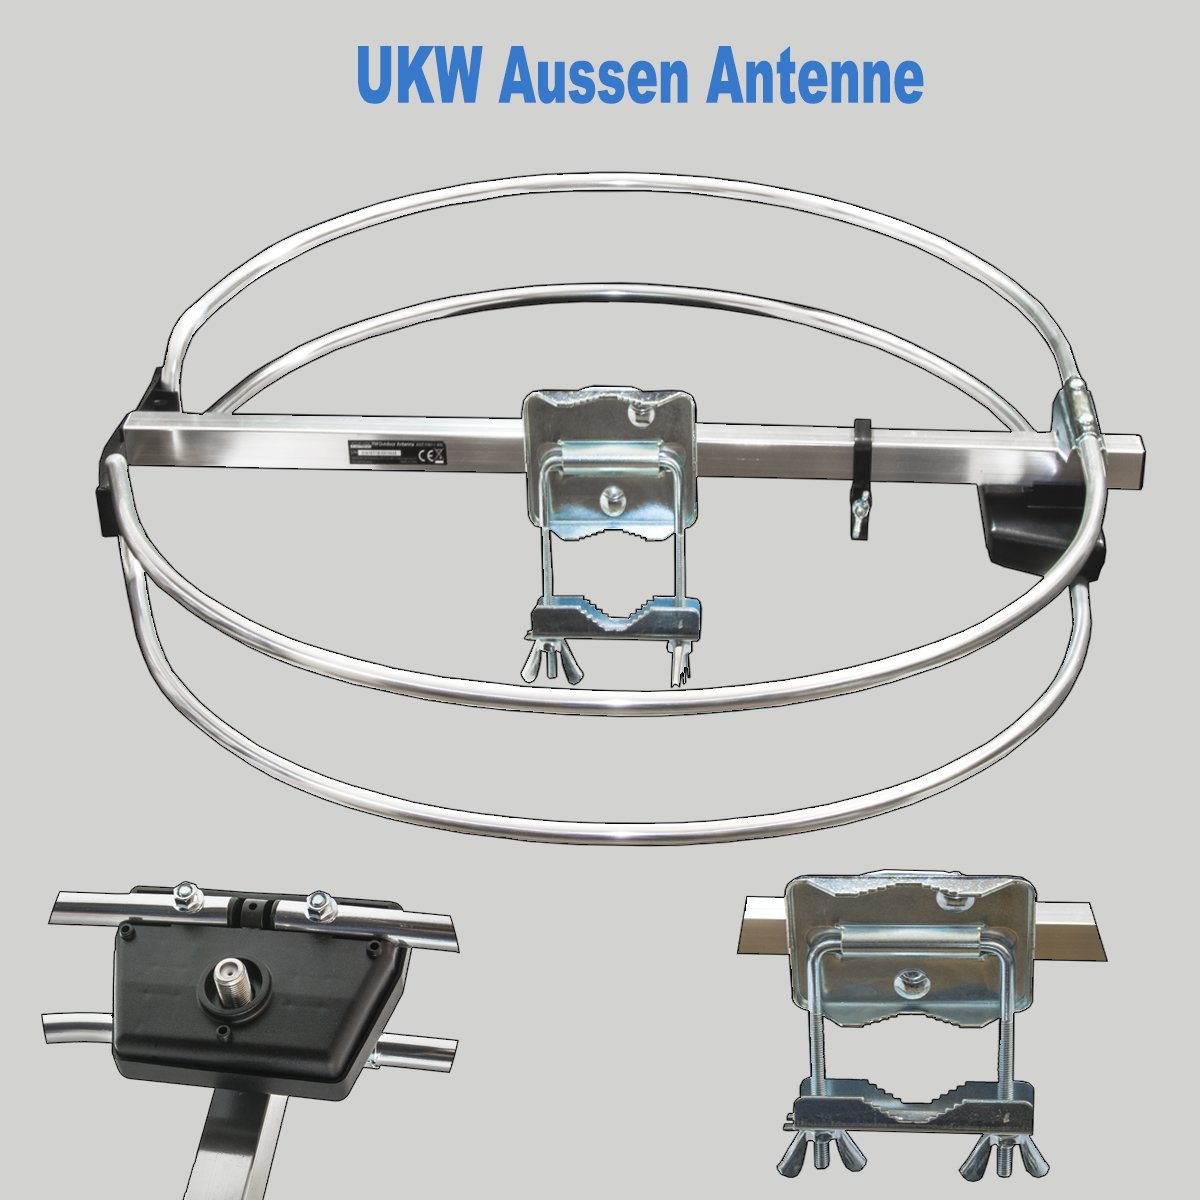 UKW Antenne ant-fm11-kn